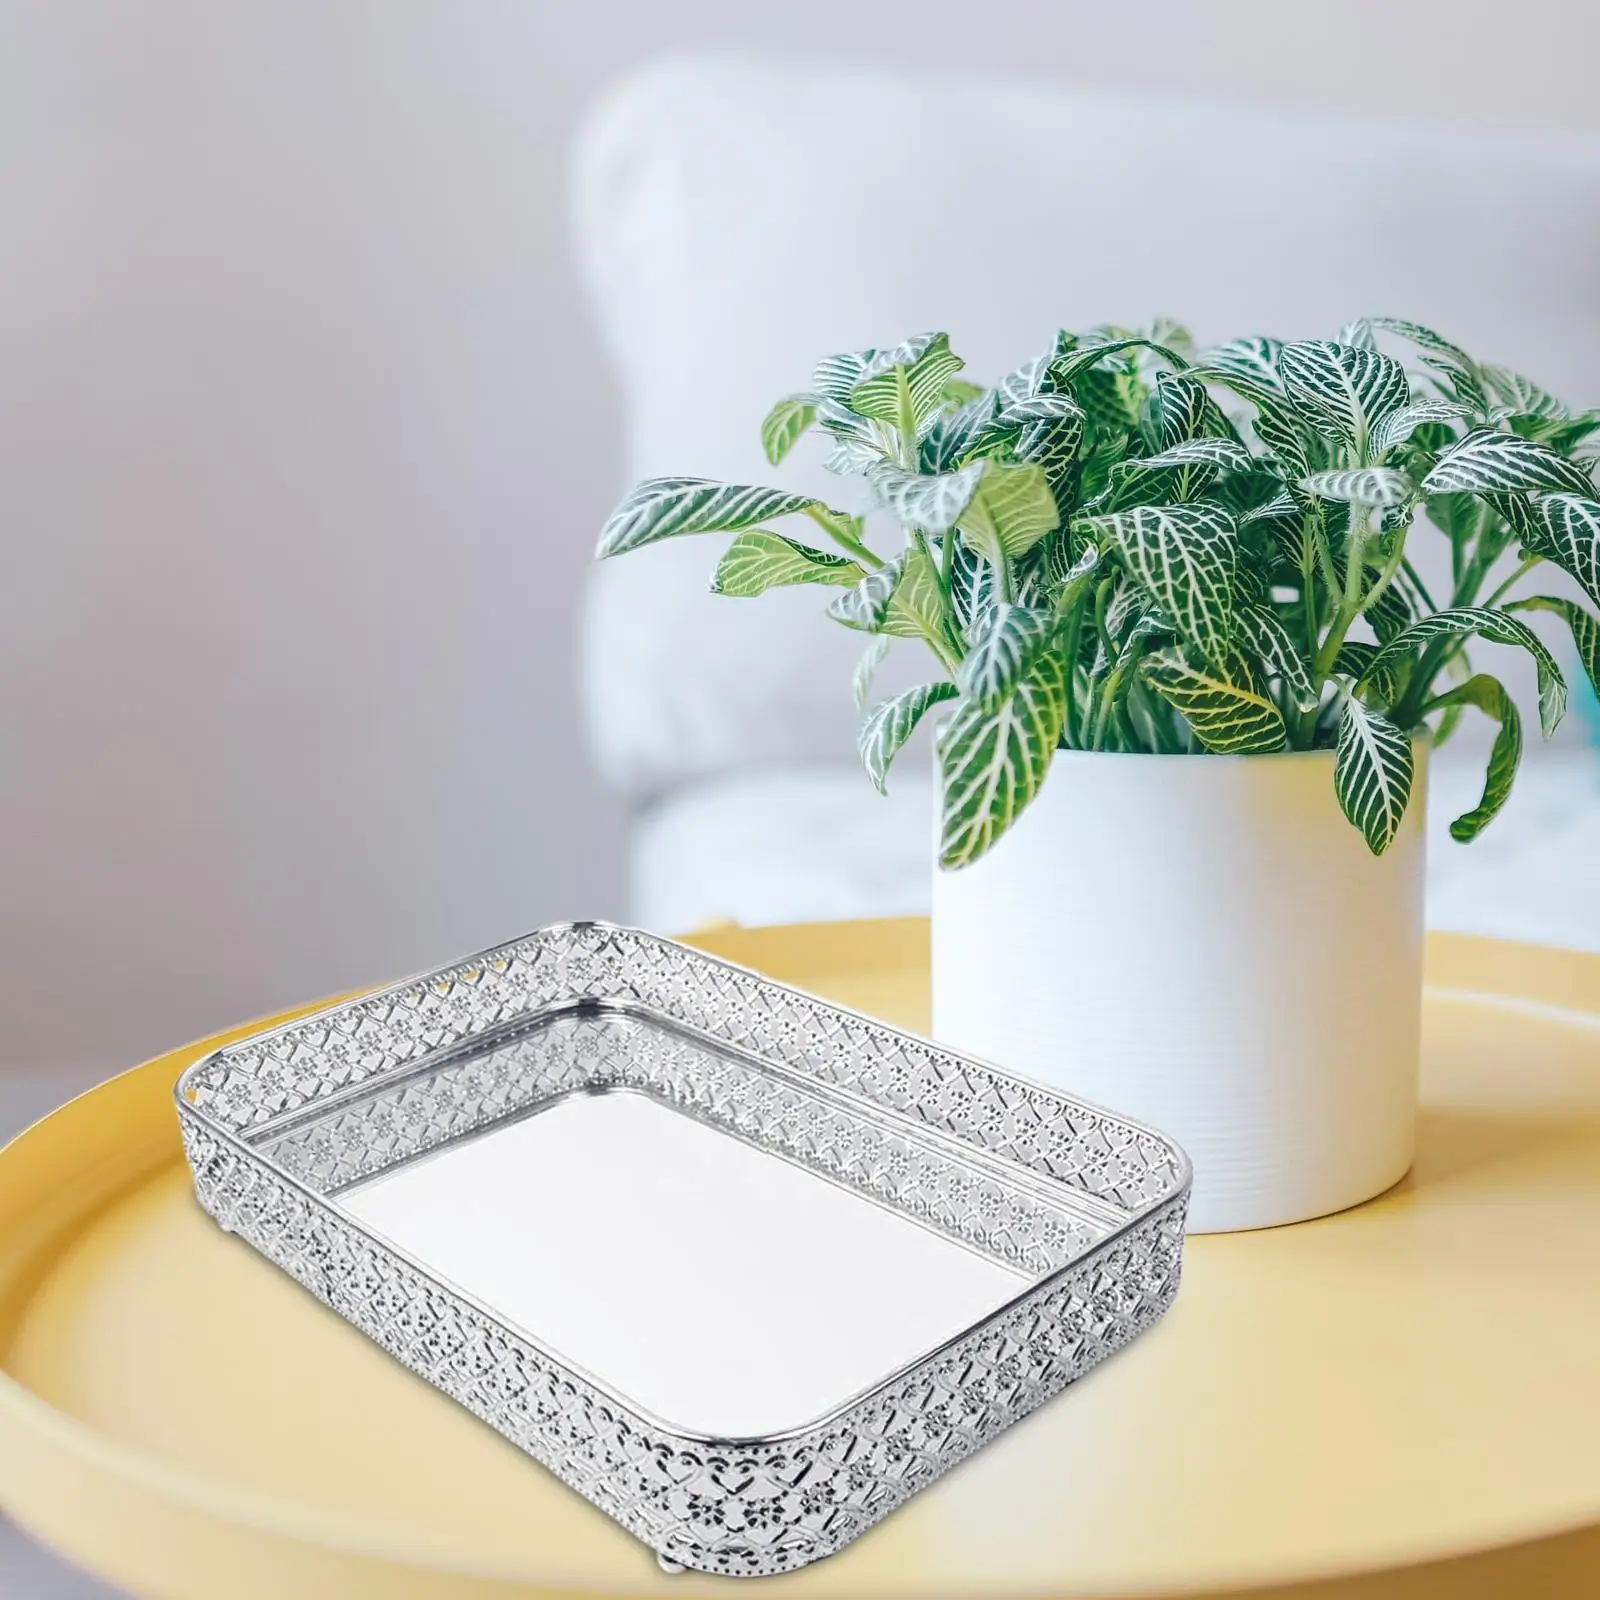 Crystal Mirrored Cosmetic Tray Ornate Decorative Tray Cosmetic Makeup Tray for Countertop Sister Bathroom Dresser Wedding